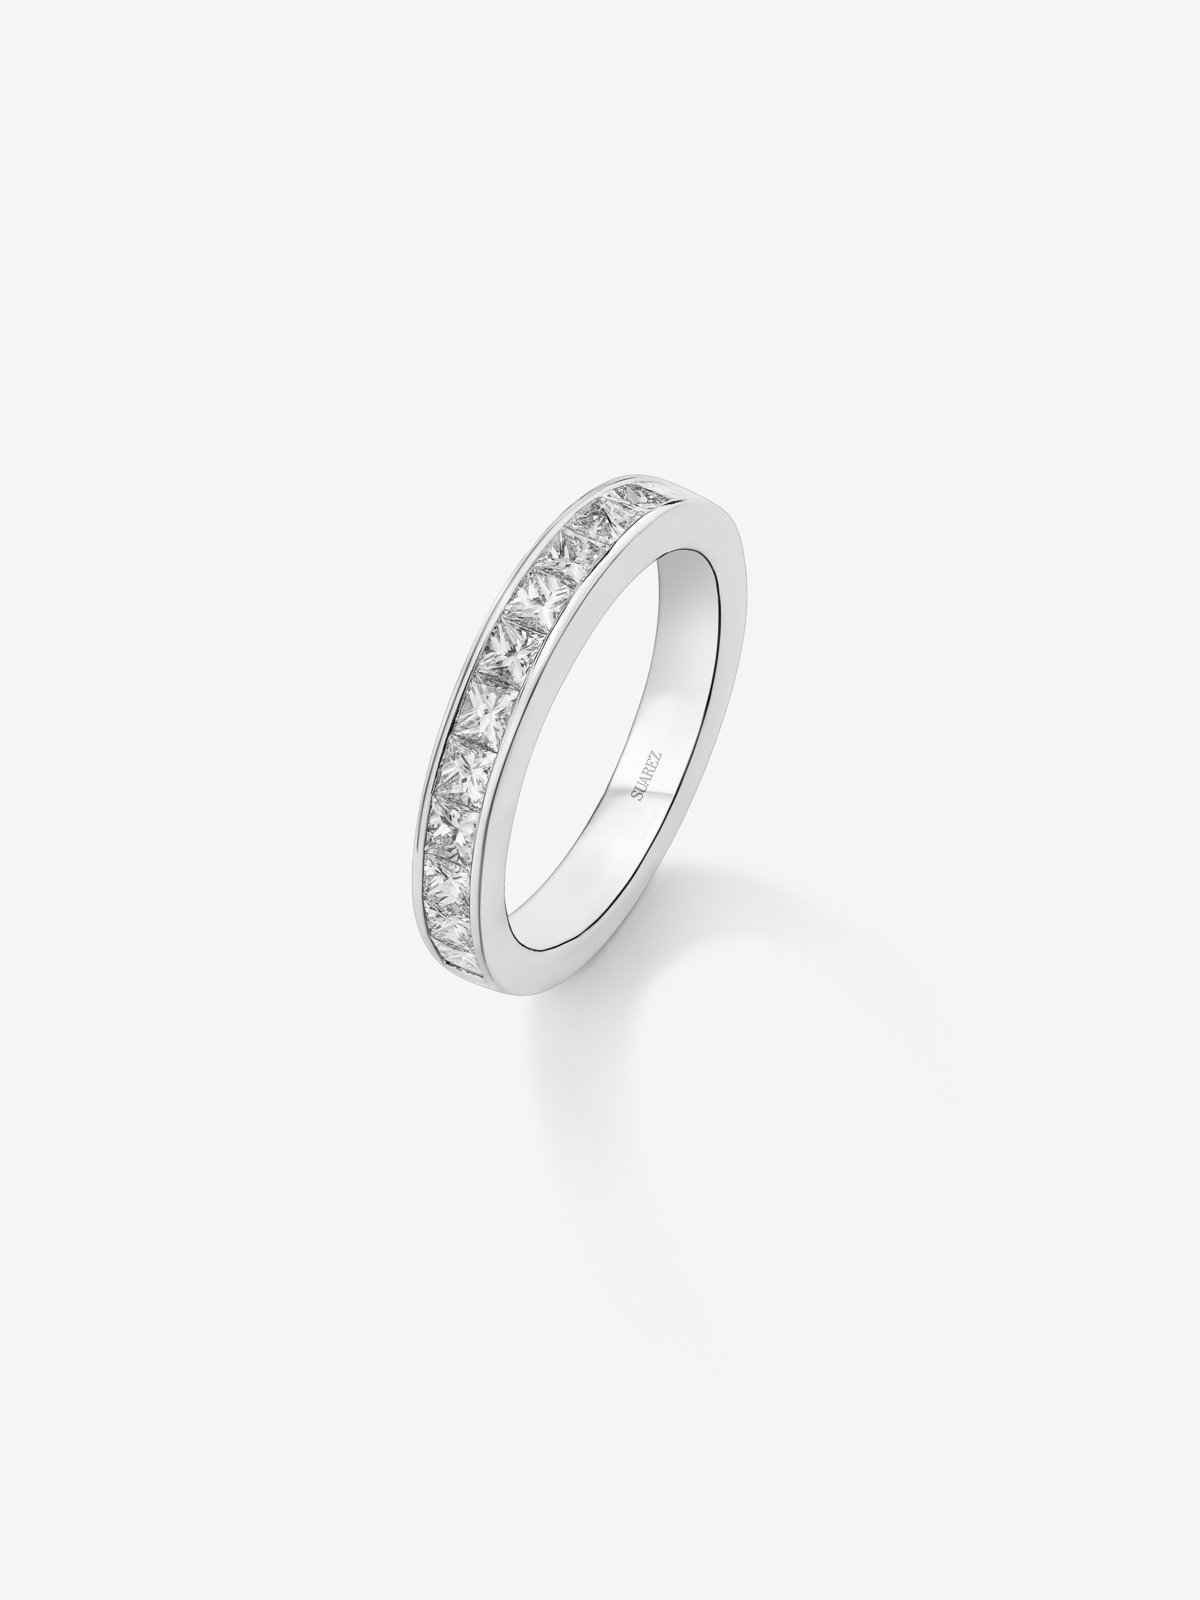 18K white gold half eternity engagement ring with princess cut diamonds on a rail.